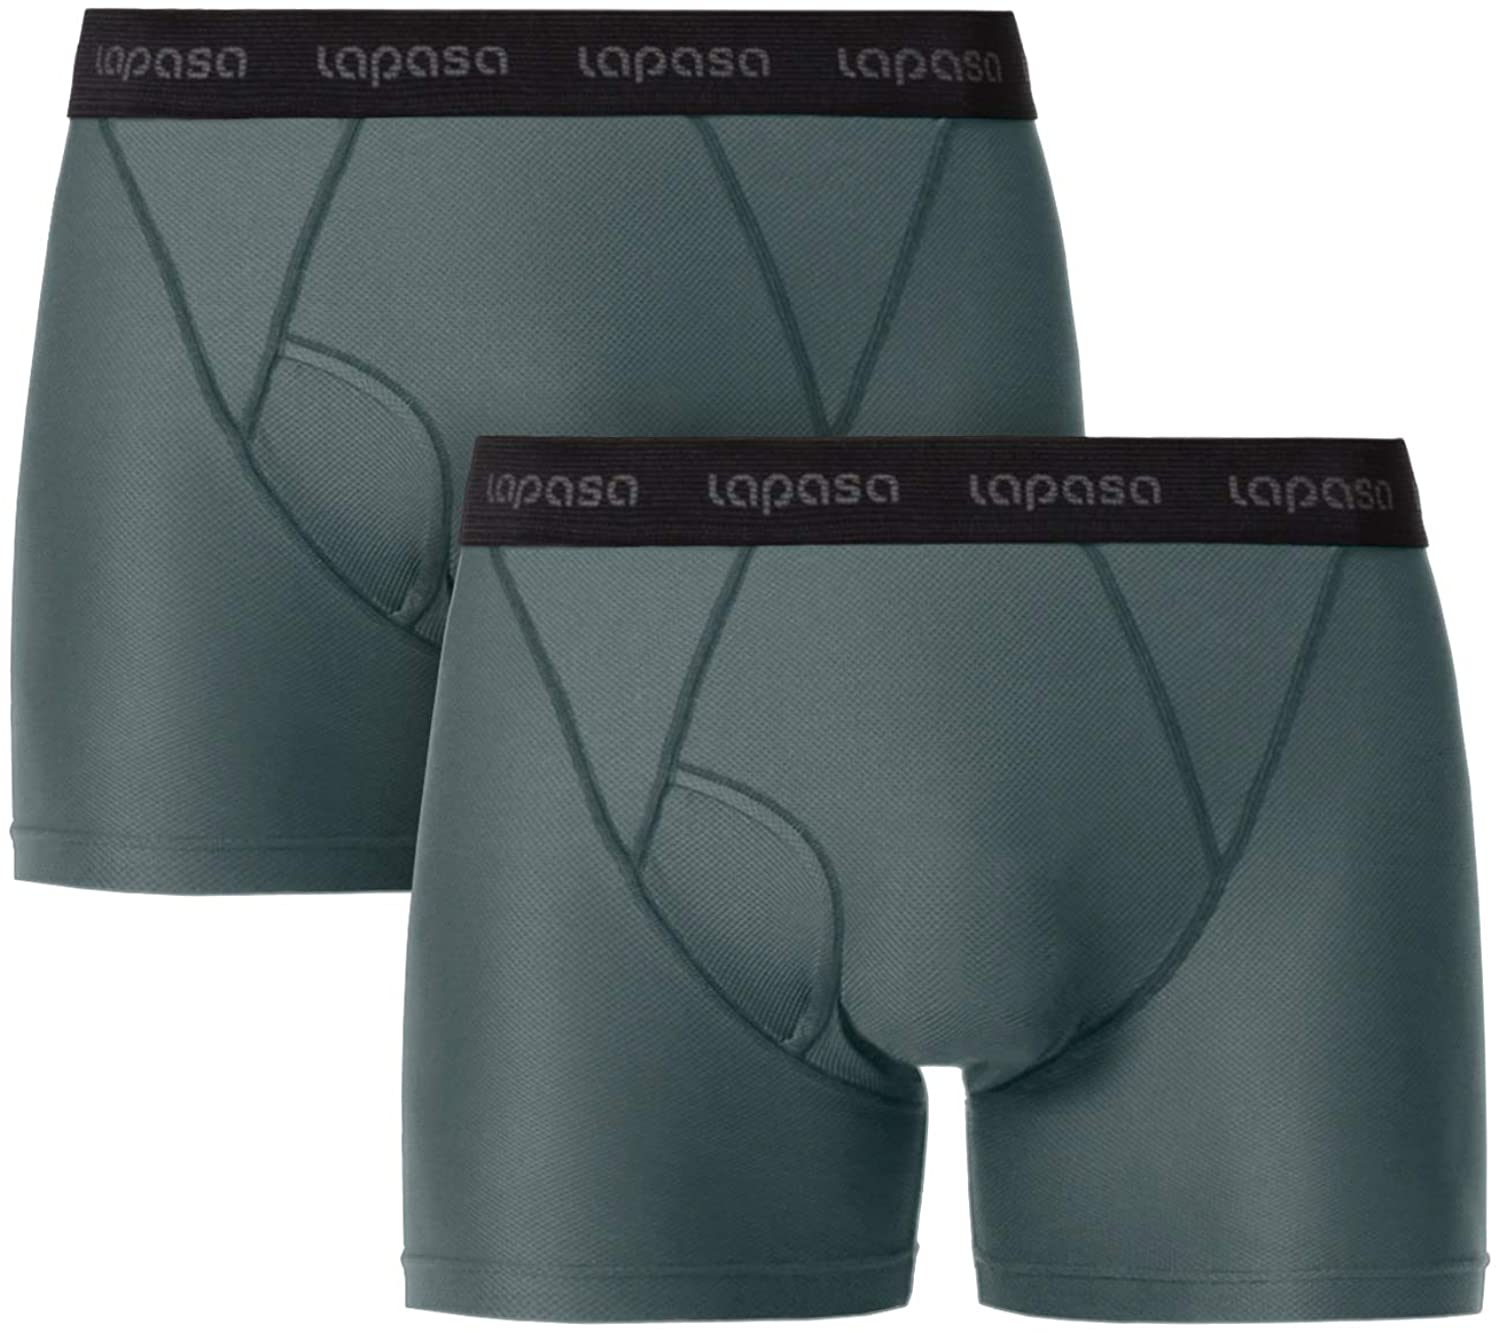 Lapasa is a new brand of athletic attire and underwear